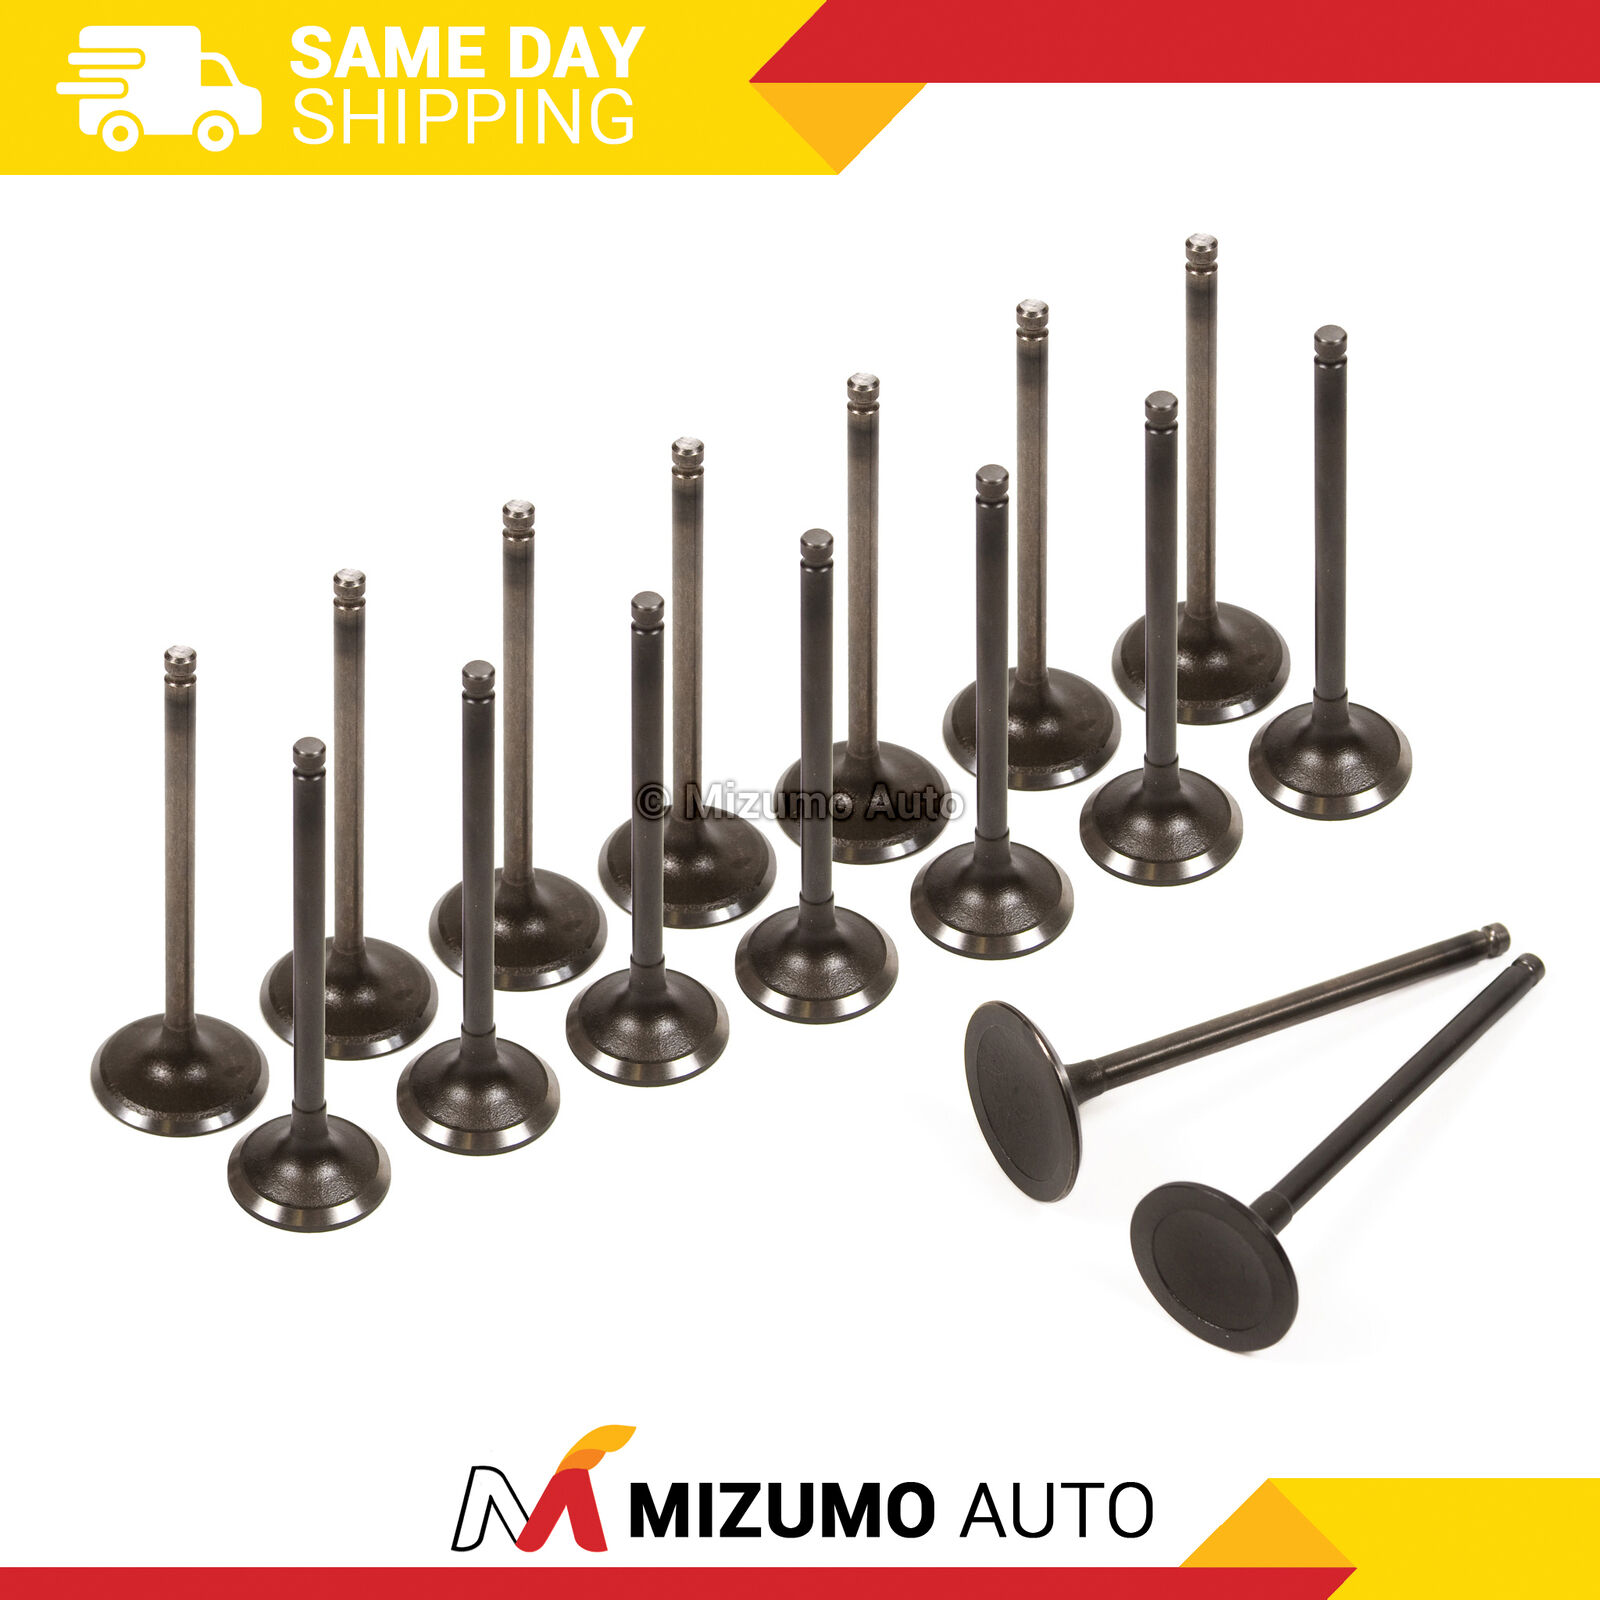 Intake Exhaust Valves Fit 04-10 Subaru Forester Legacy Outback TURBO 2.5L DOHC